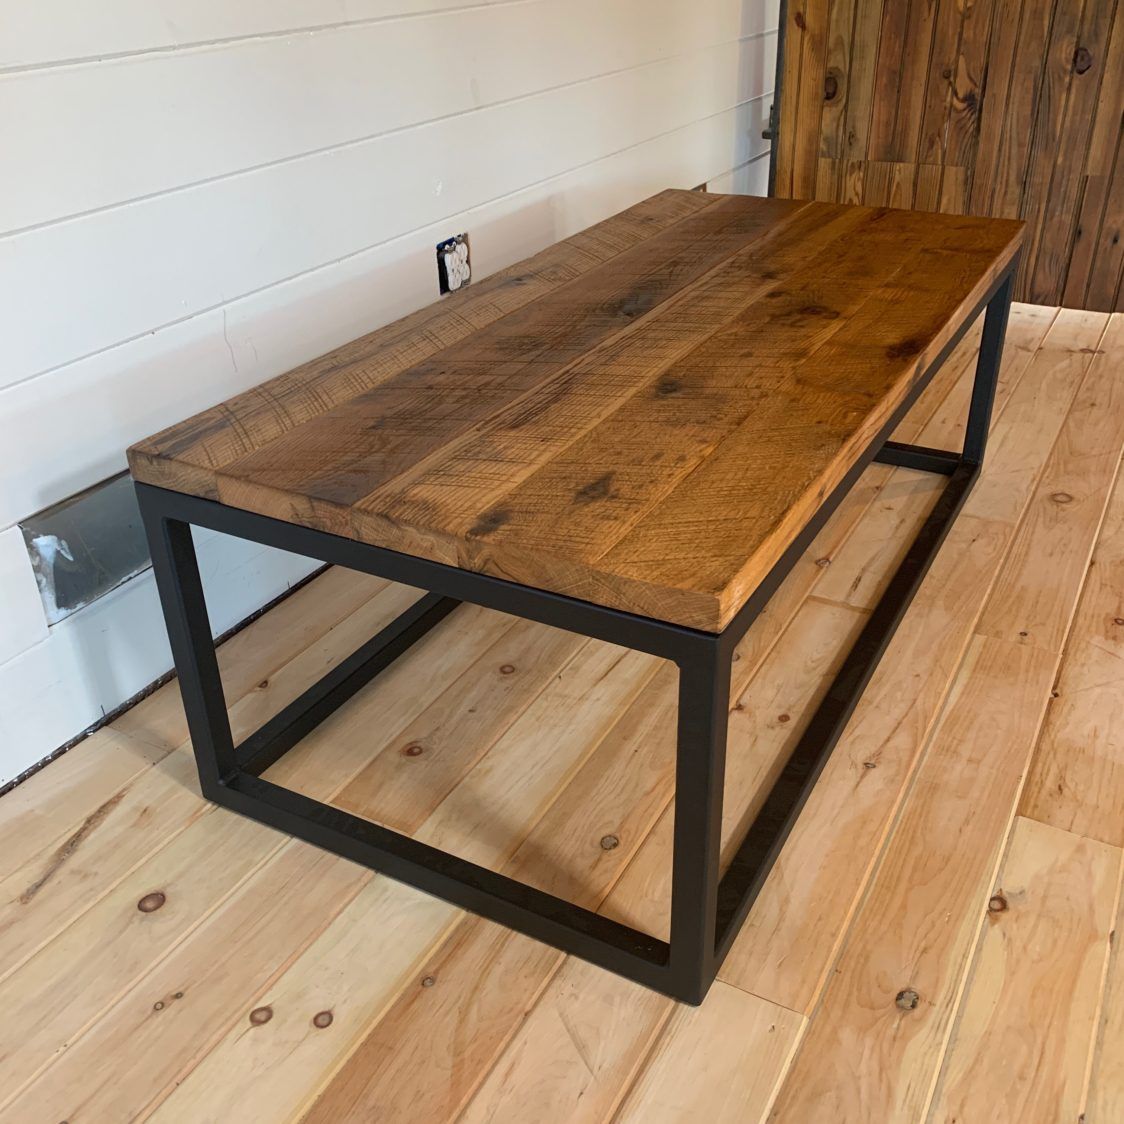 Nate Metal Base Coffee Table With Oak Top | Furniture From The Barn Intended For Metal Base Coffee Tables (View 9 of 20)